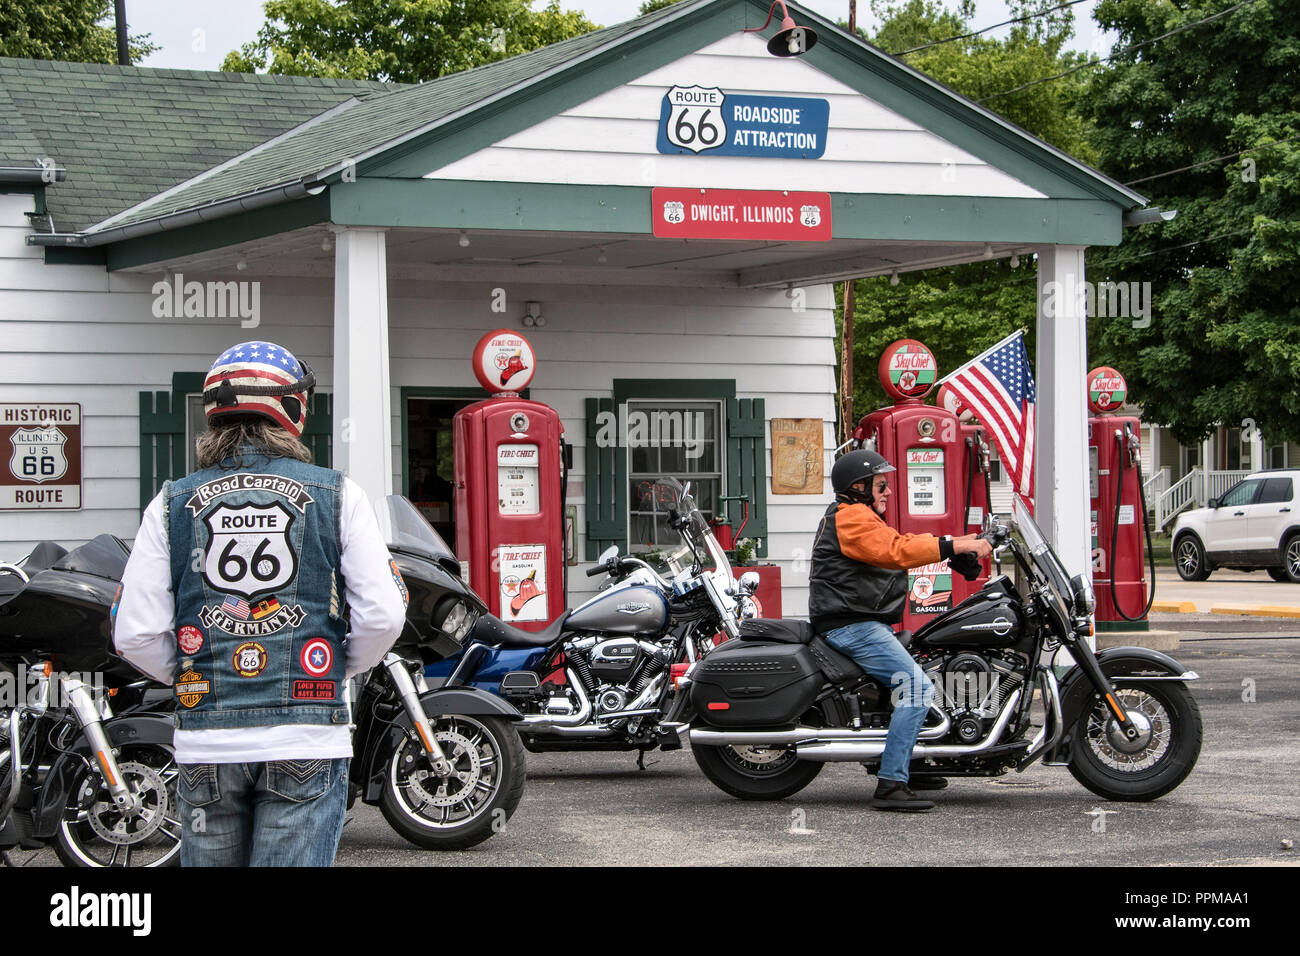 Harley Davidson Motorcycles Parked In Front Of Historic Gas Station Ambler S Texaco Gas Station On Route 66 Dwight Illinois Stock Photo Alamy